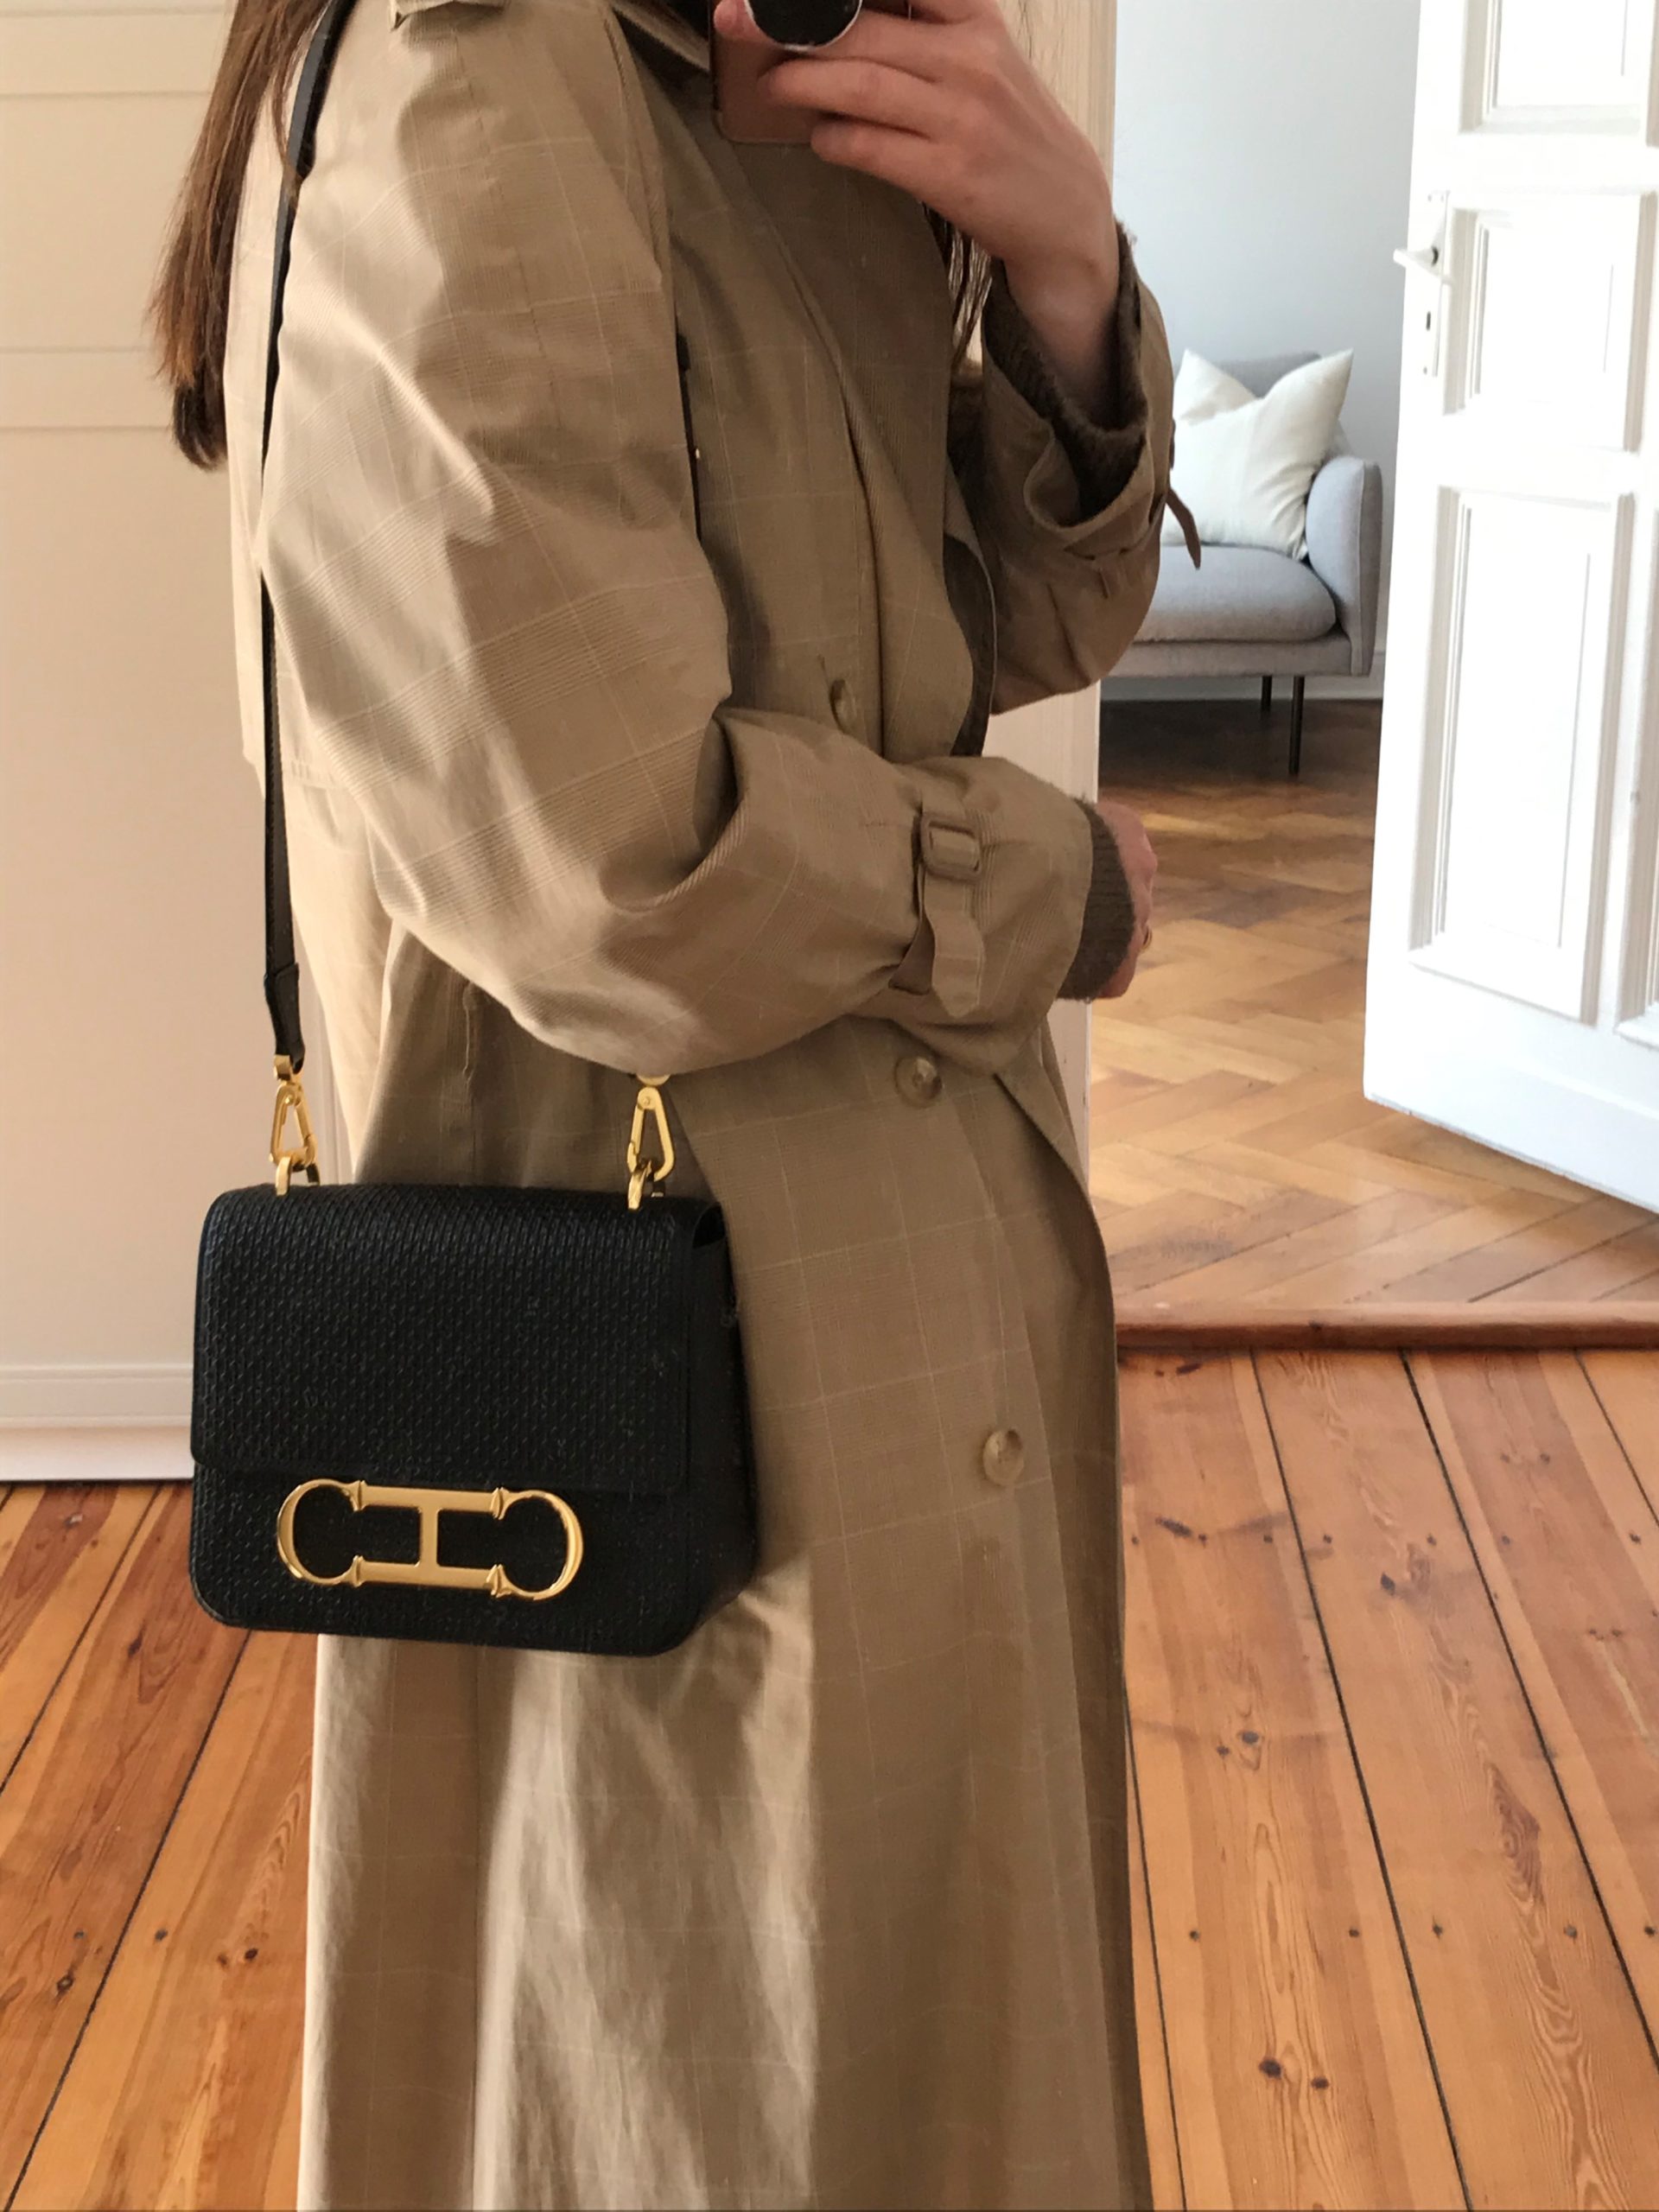 Style, Caralina Herrera Shoulder Bag, Beige Trench Coat, Daily Fashion Style | RG Daily Blog